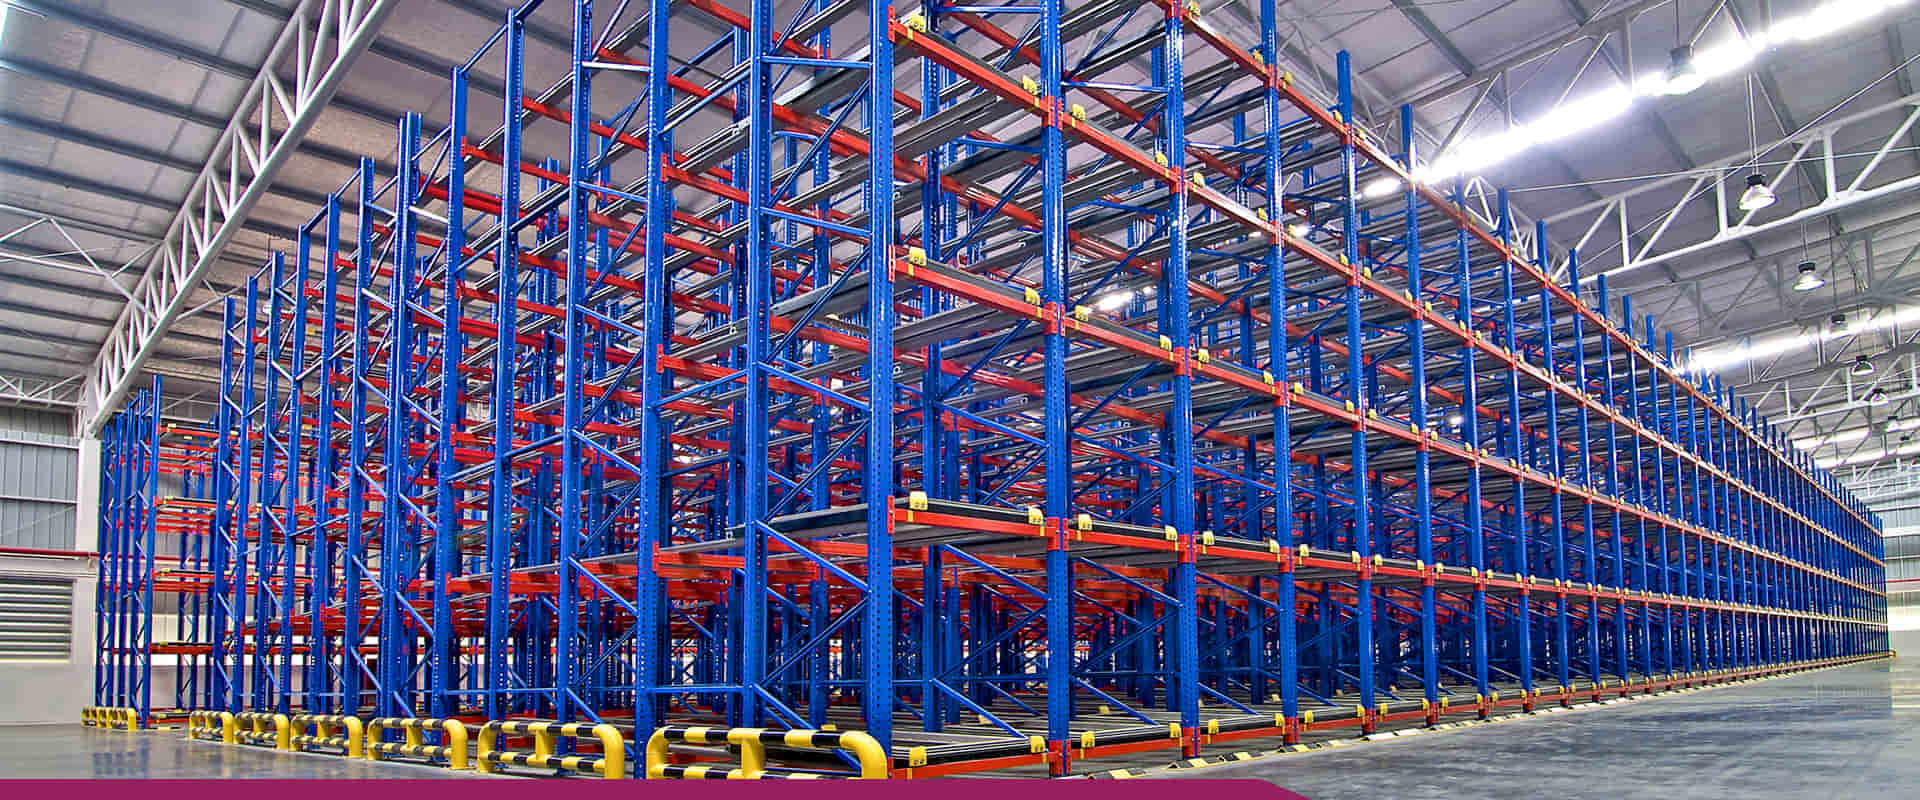 India’s Top Warehouse And Industrial Storage Racks Manufacturer In Patna